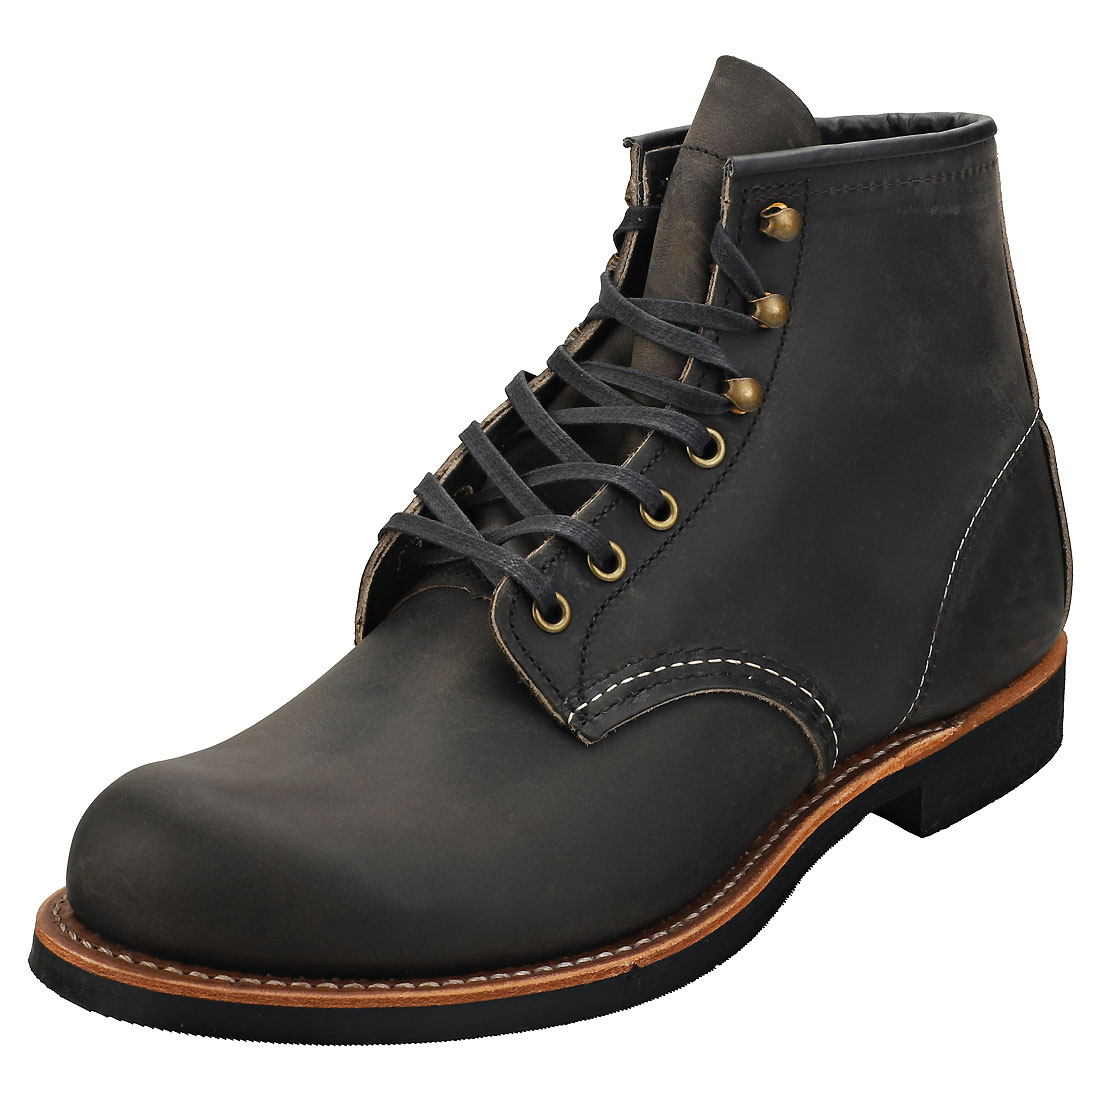 Red Wing Blacksmith Mens Charcoal Classic Boots - 12 UK | eBay